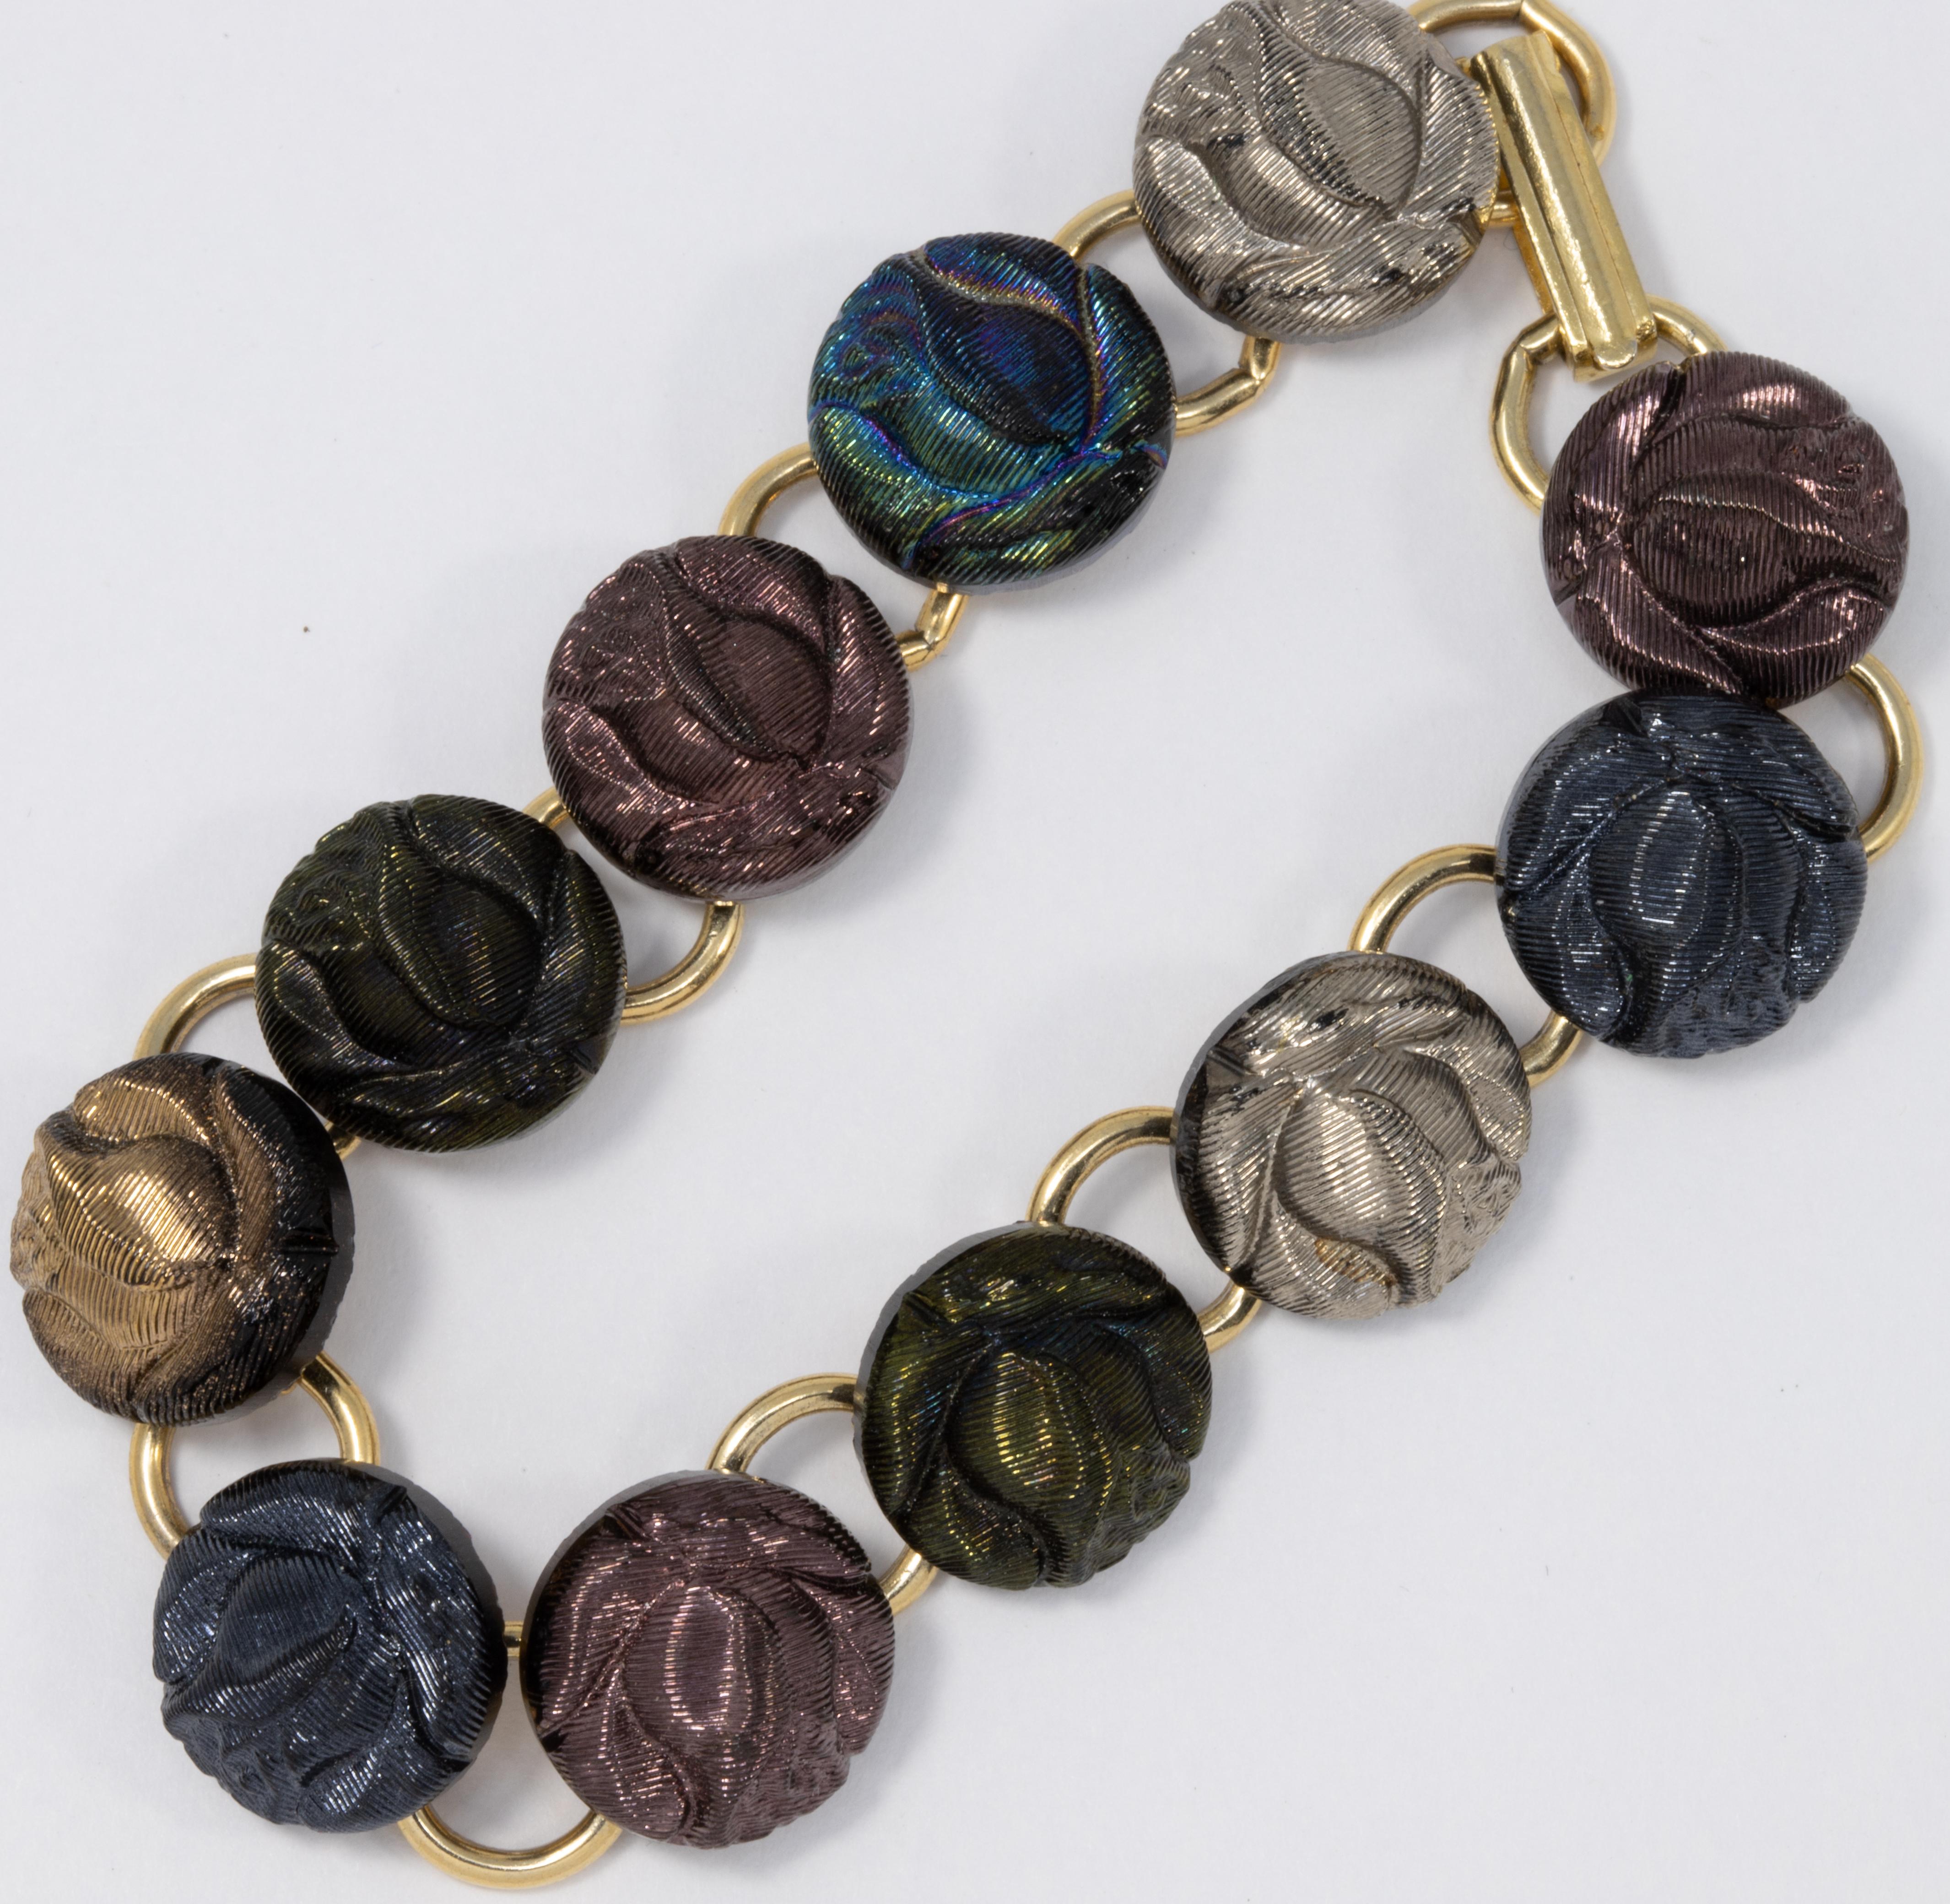 An elegant vintage bracelet, featuring metallic rose links in violet, azure blue, silver, forest green, and iridescent colors. Gold-tone finish.

